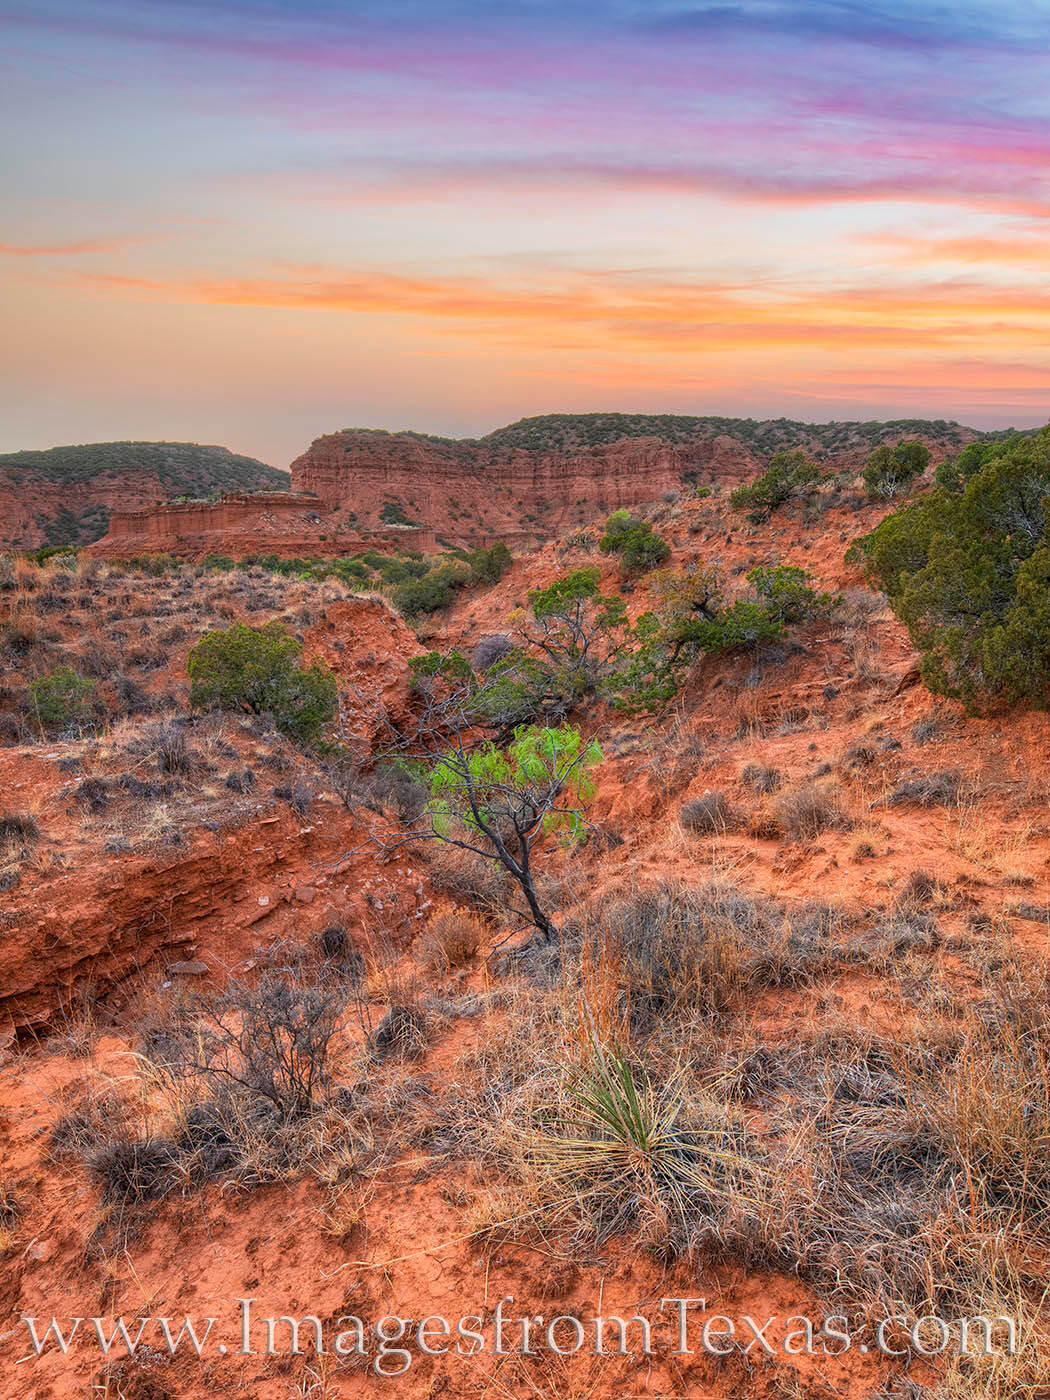 Taken far off-trail, this photo shows the rugged and beautiful terrain of Caprock Canyons at sunset.